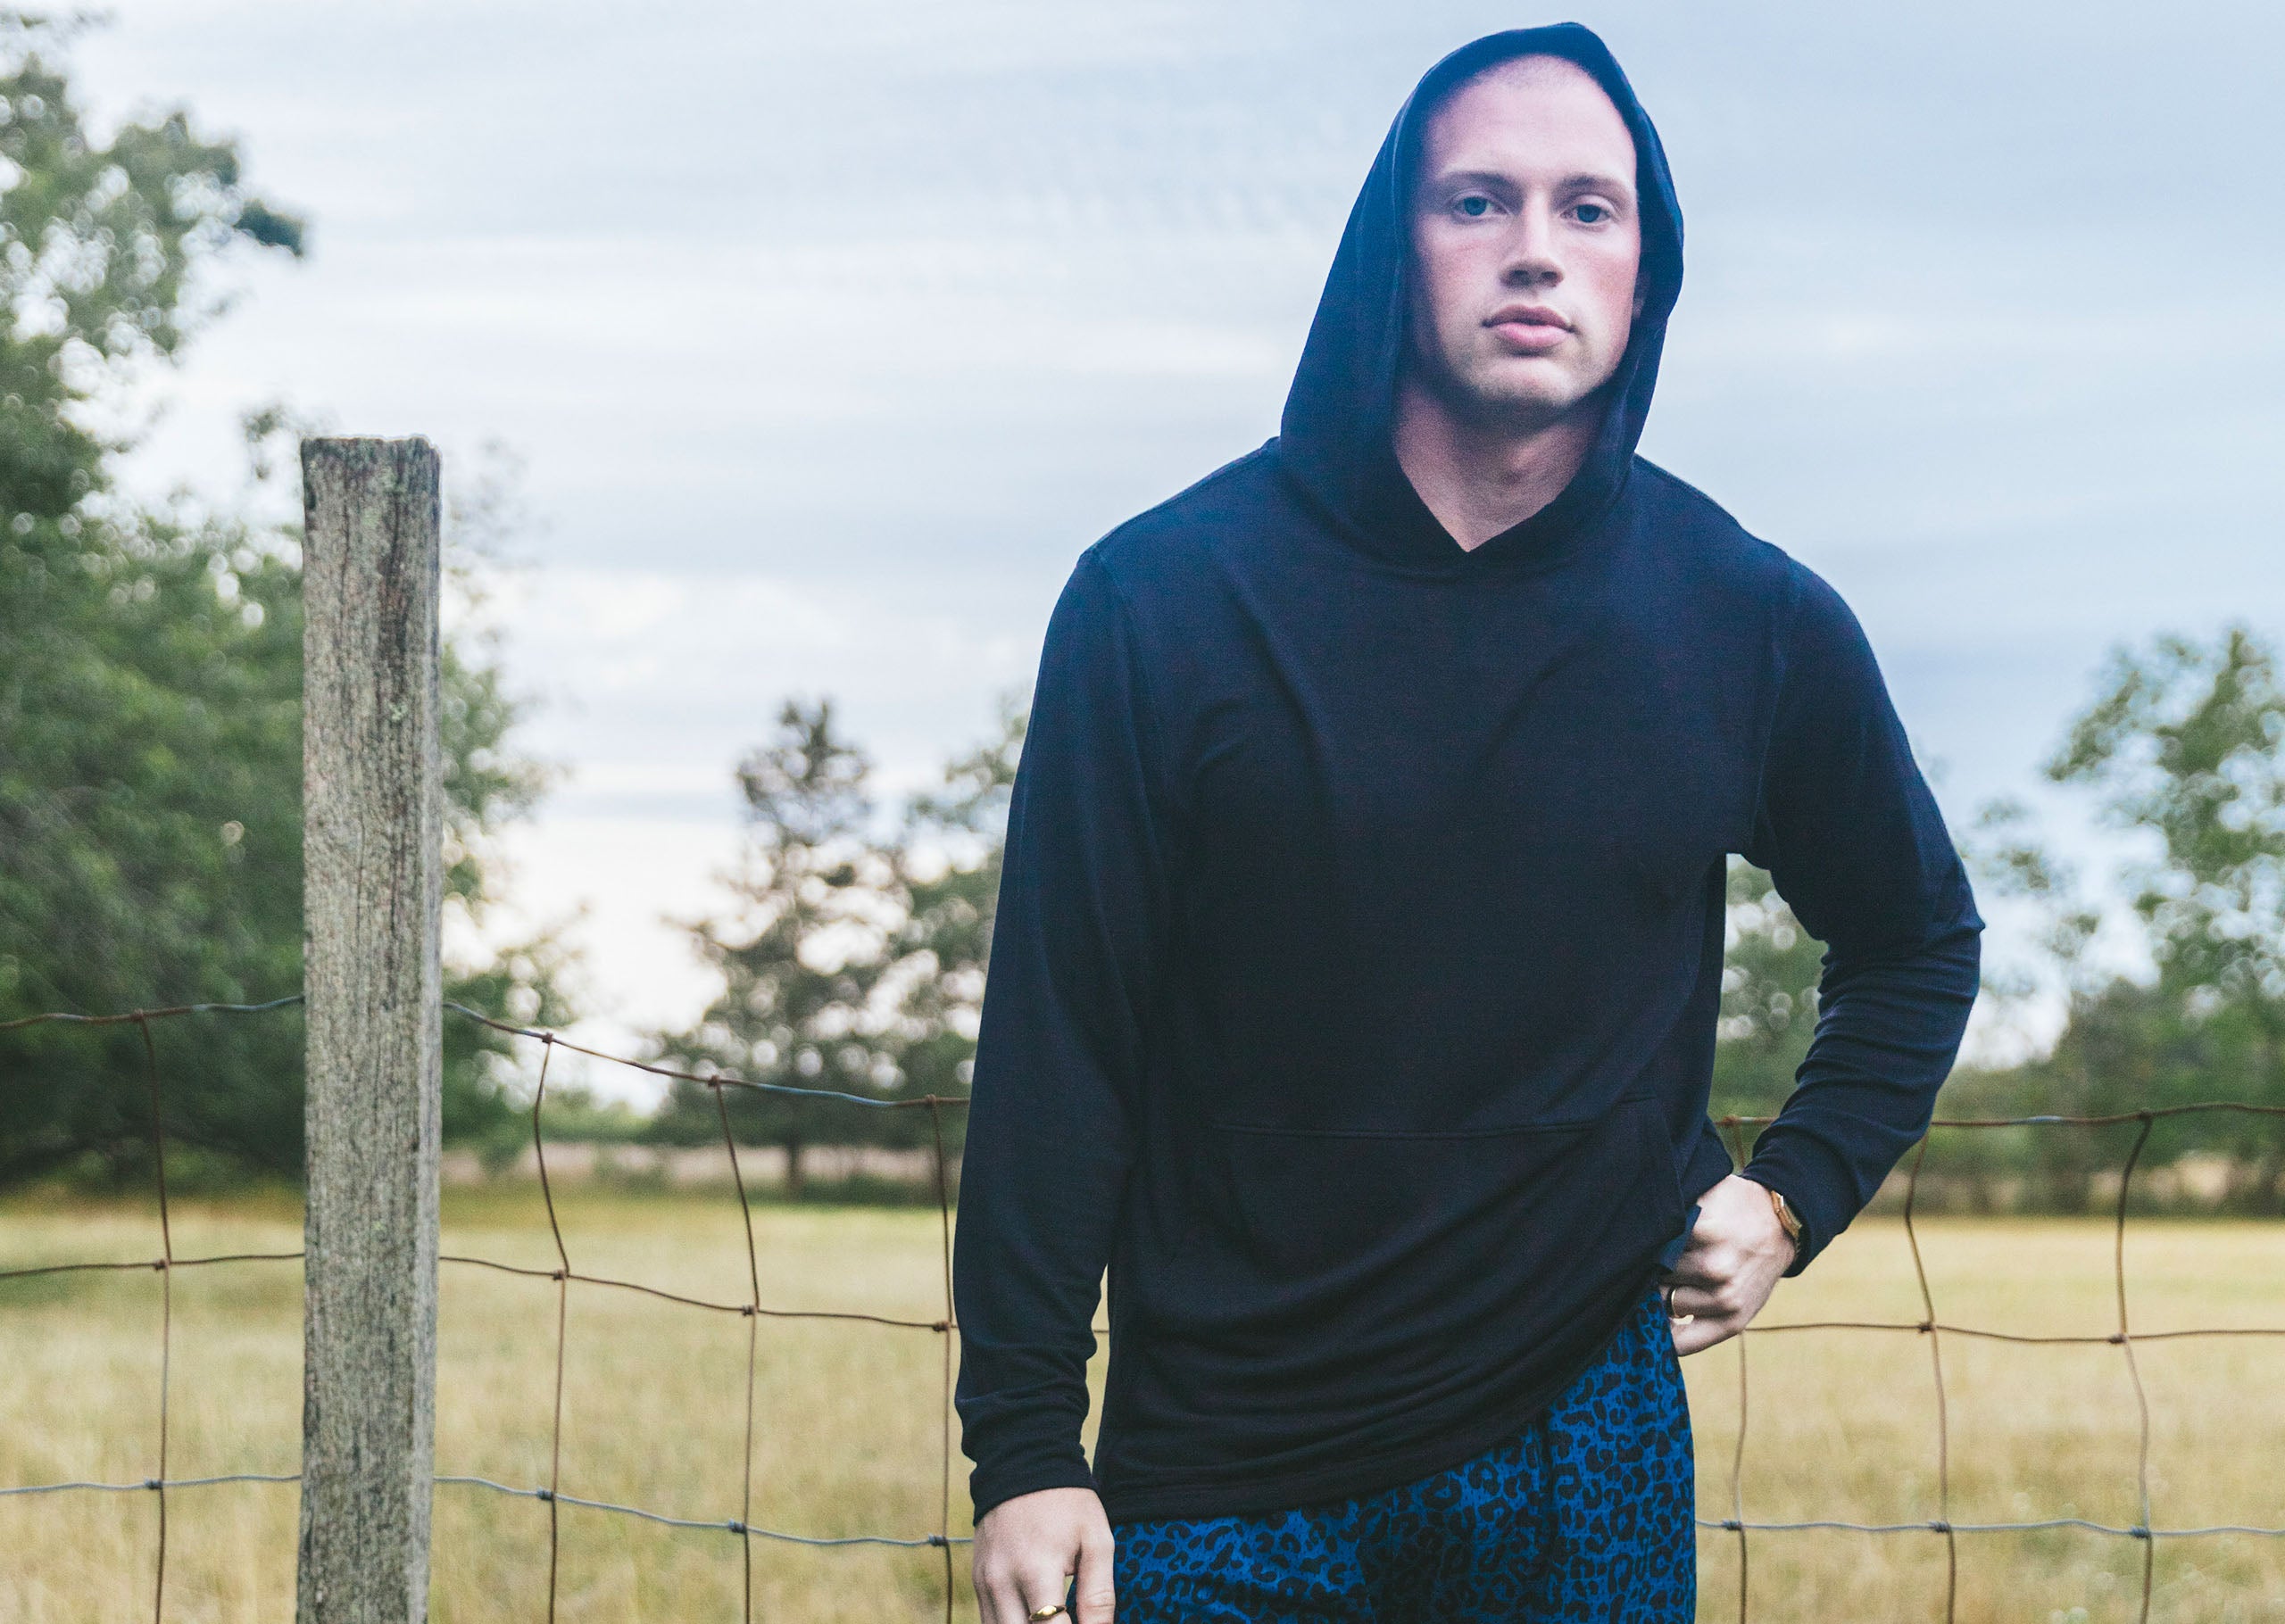 Man standing in field in front of fence wearing a black hoodie.